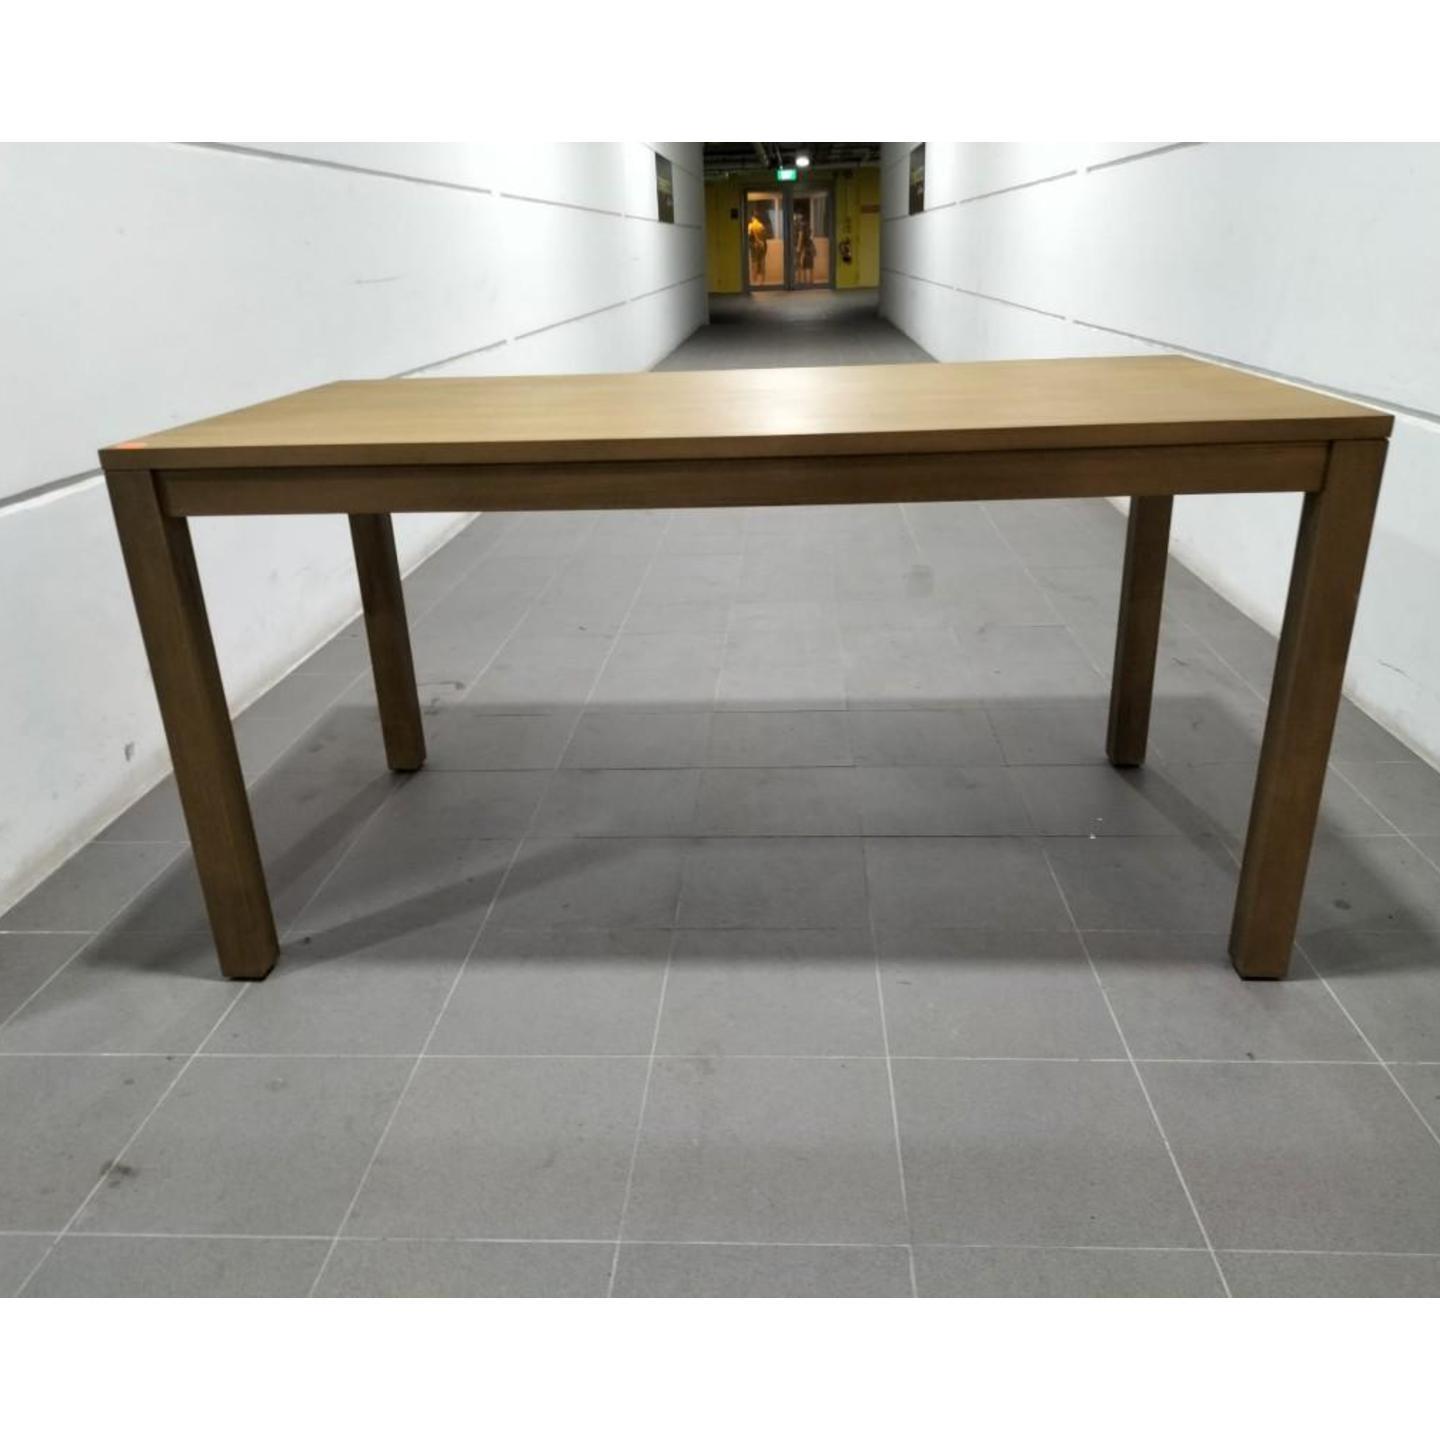 HOWLETT Solid Wood Dining Table